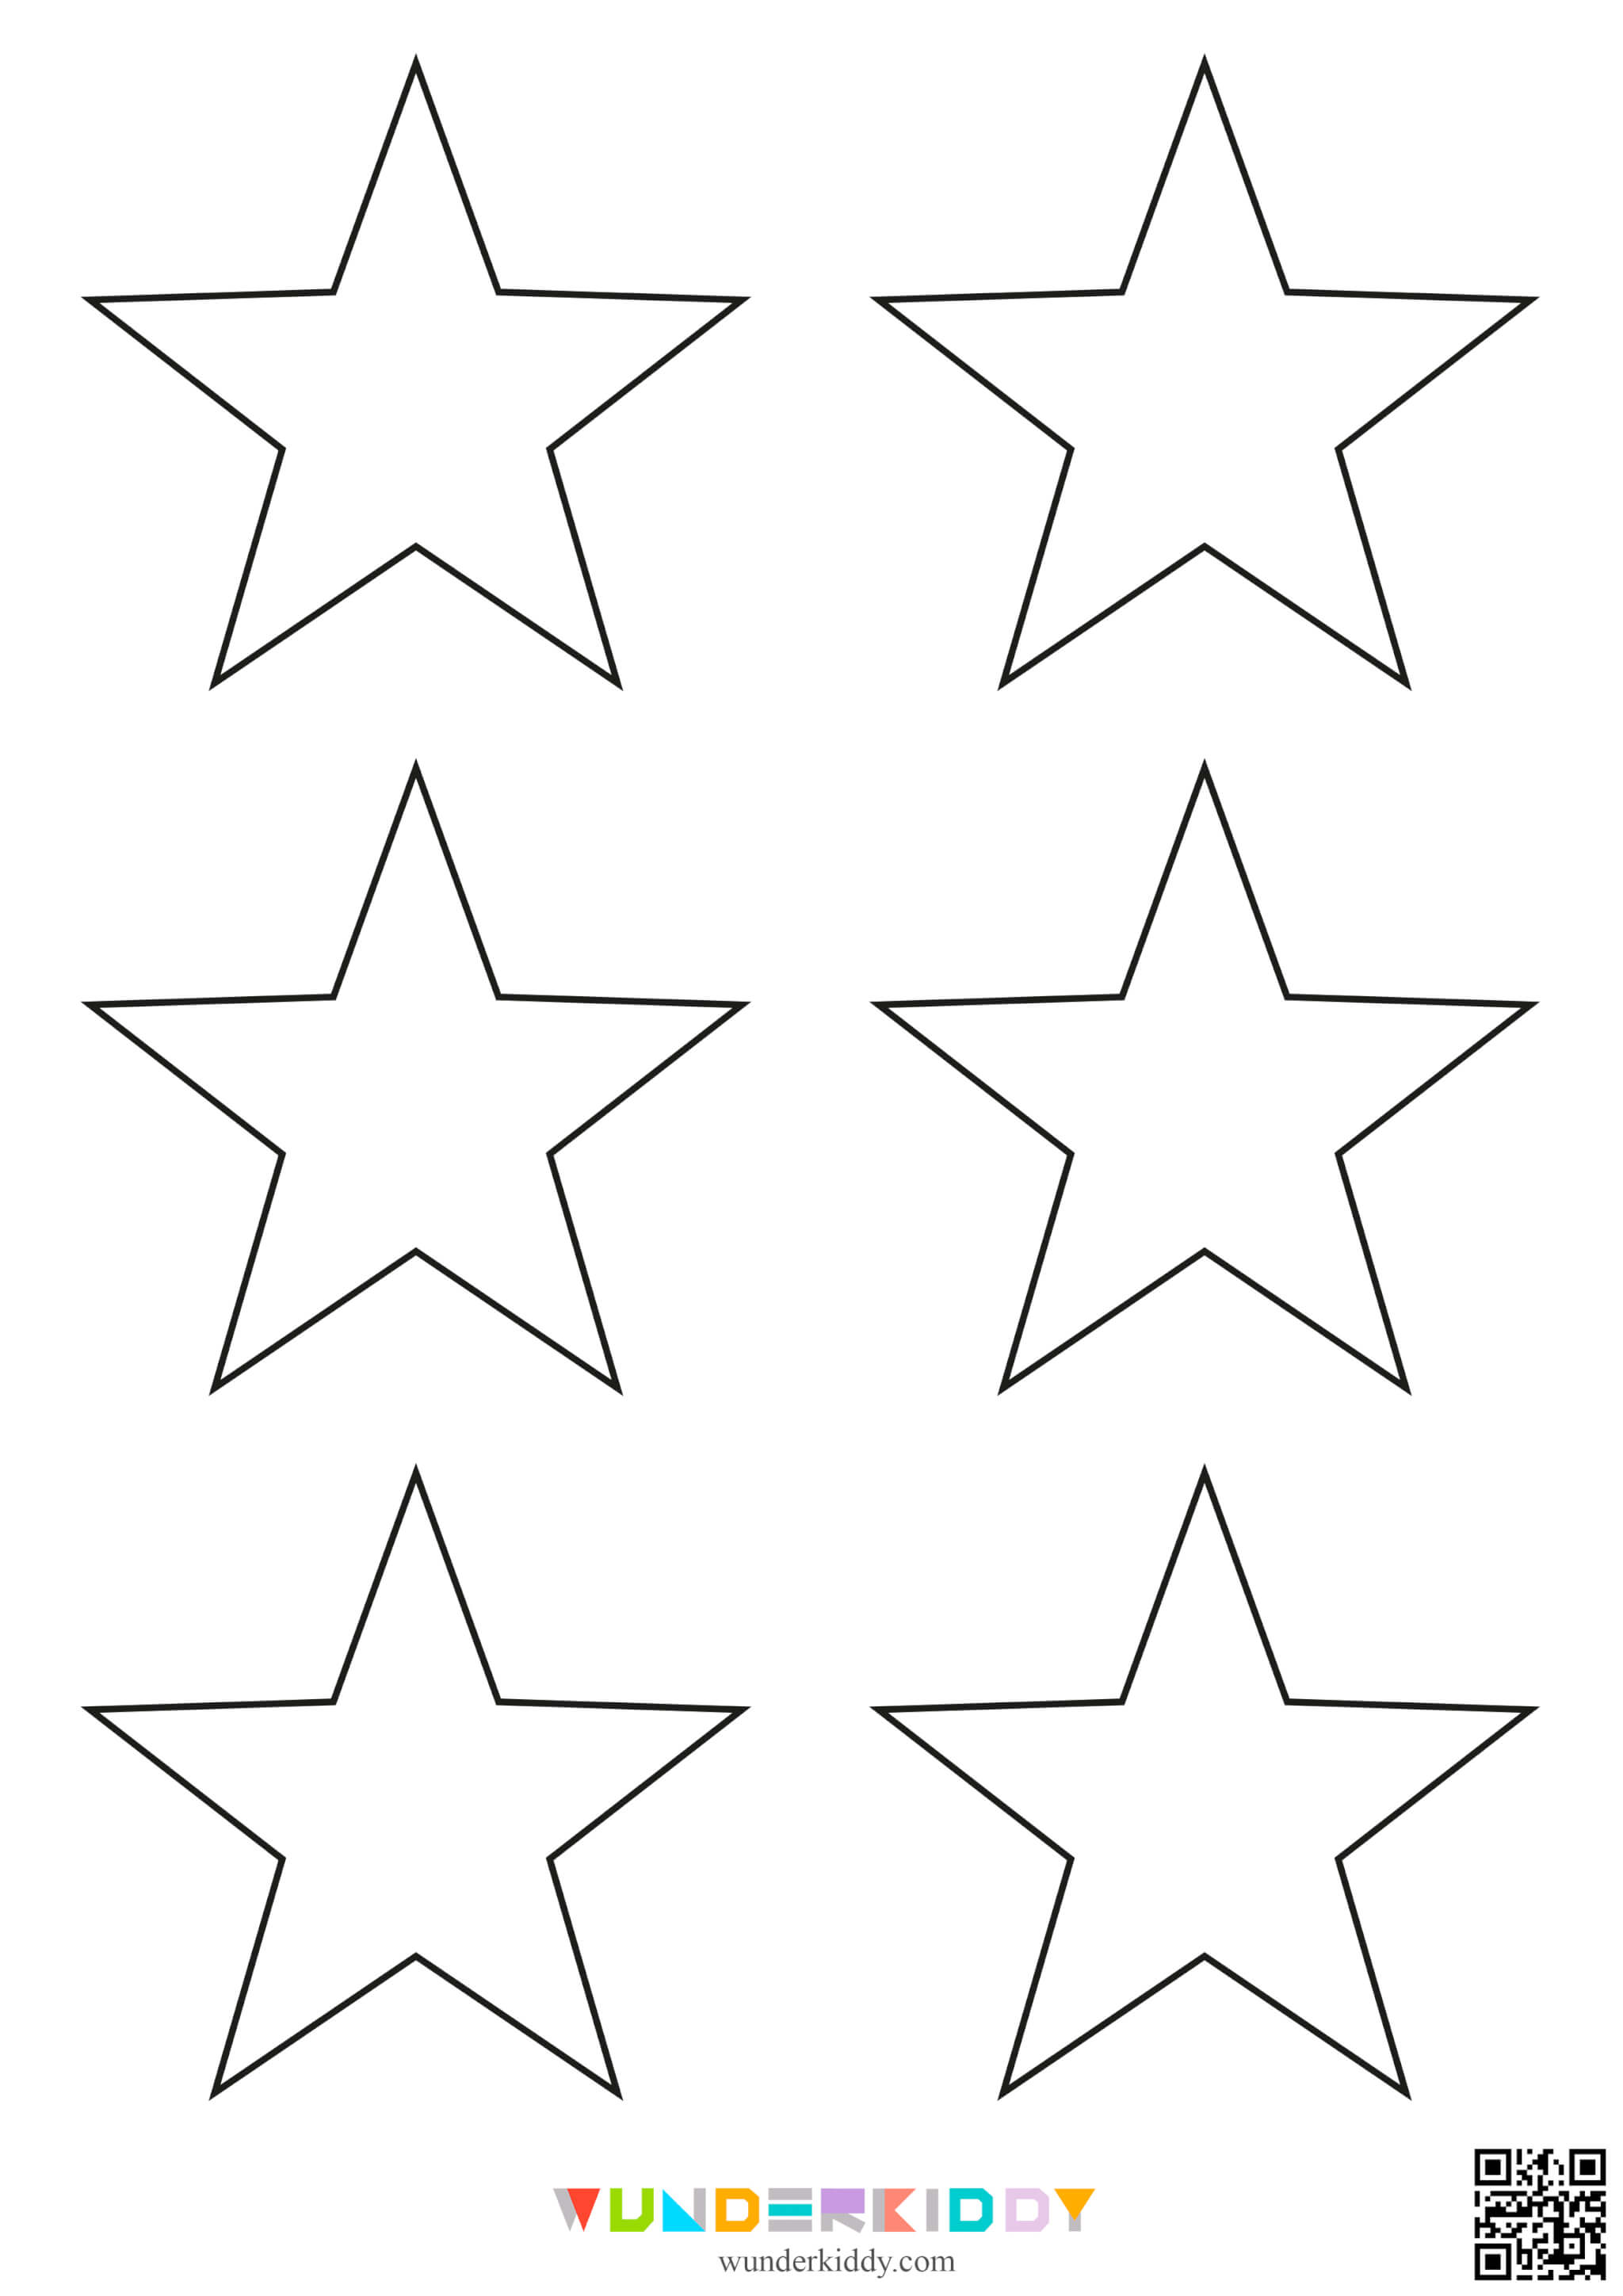 Star Outlines Templates - Image 6